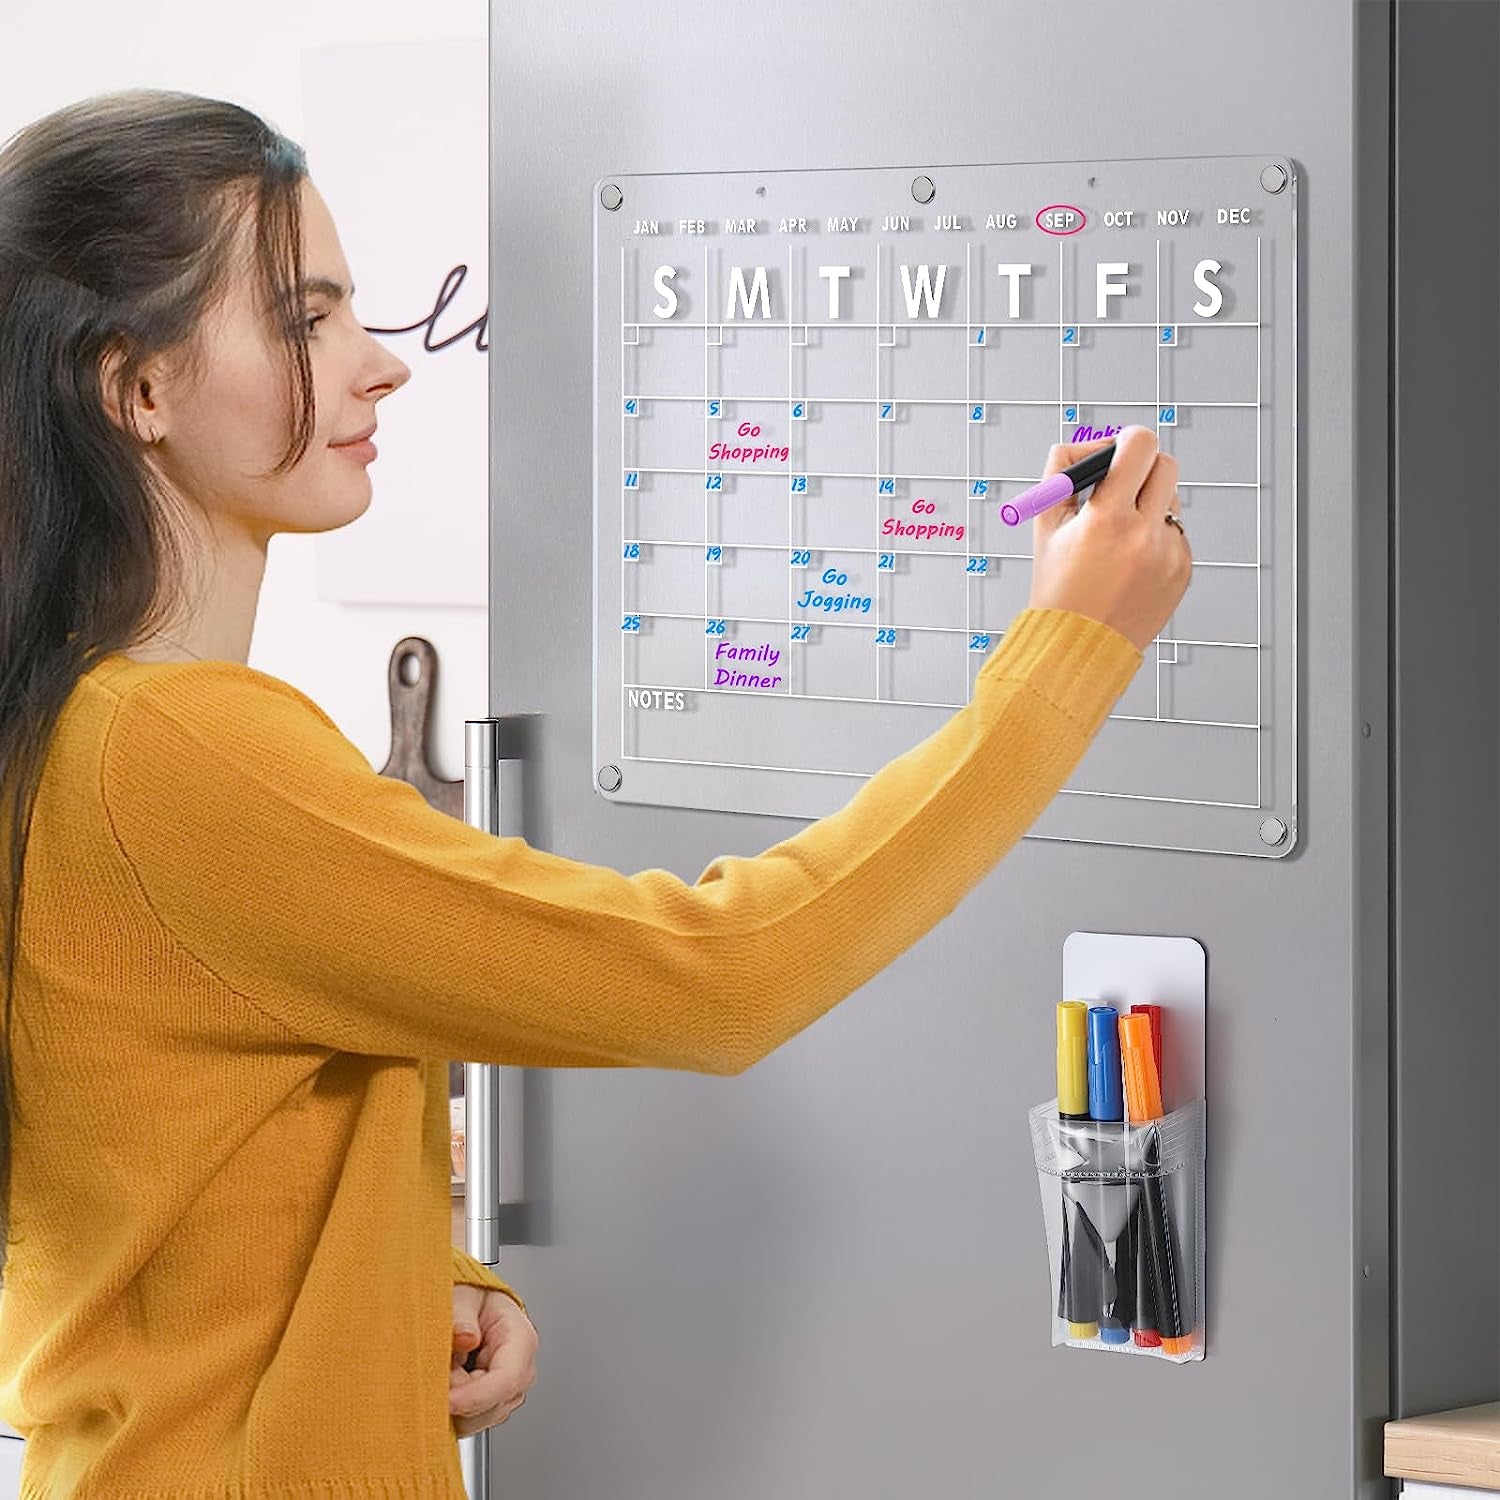 Acrylic Magnetic Dry Erase Board Calendar for Fridge, 16.5"X12" Inch Clear Dry Erase Calendar for Refrigerator, Magnetic Planning Calendar Includes 6 Colors Dry Erase Markers and Magnetic Pen Holder